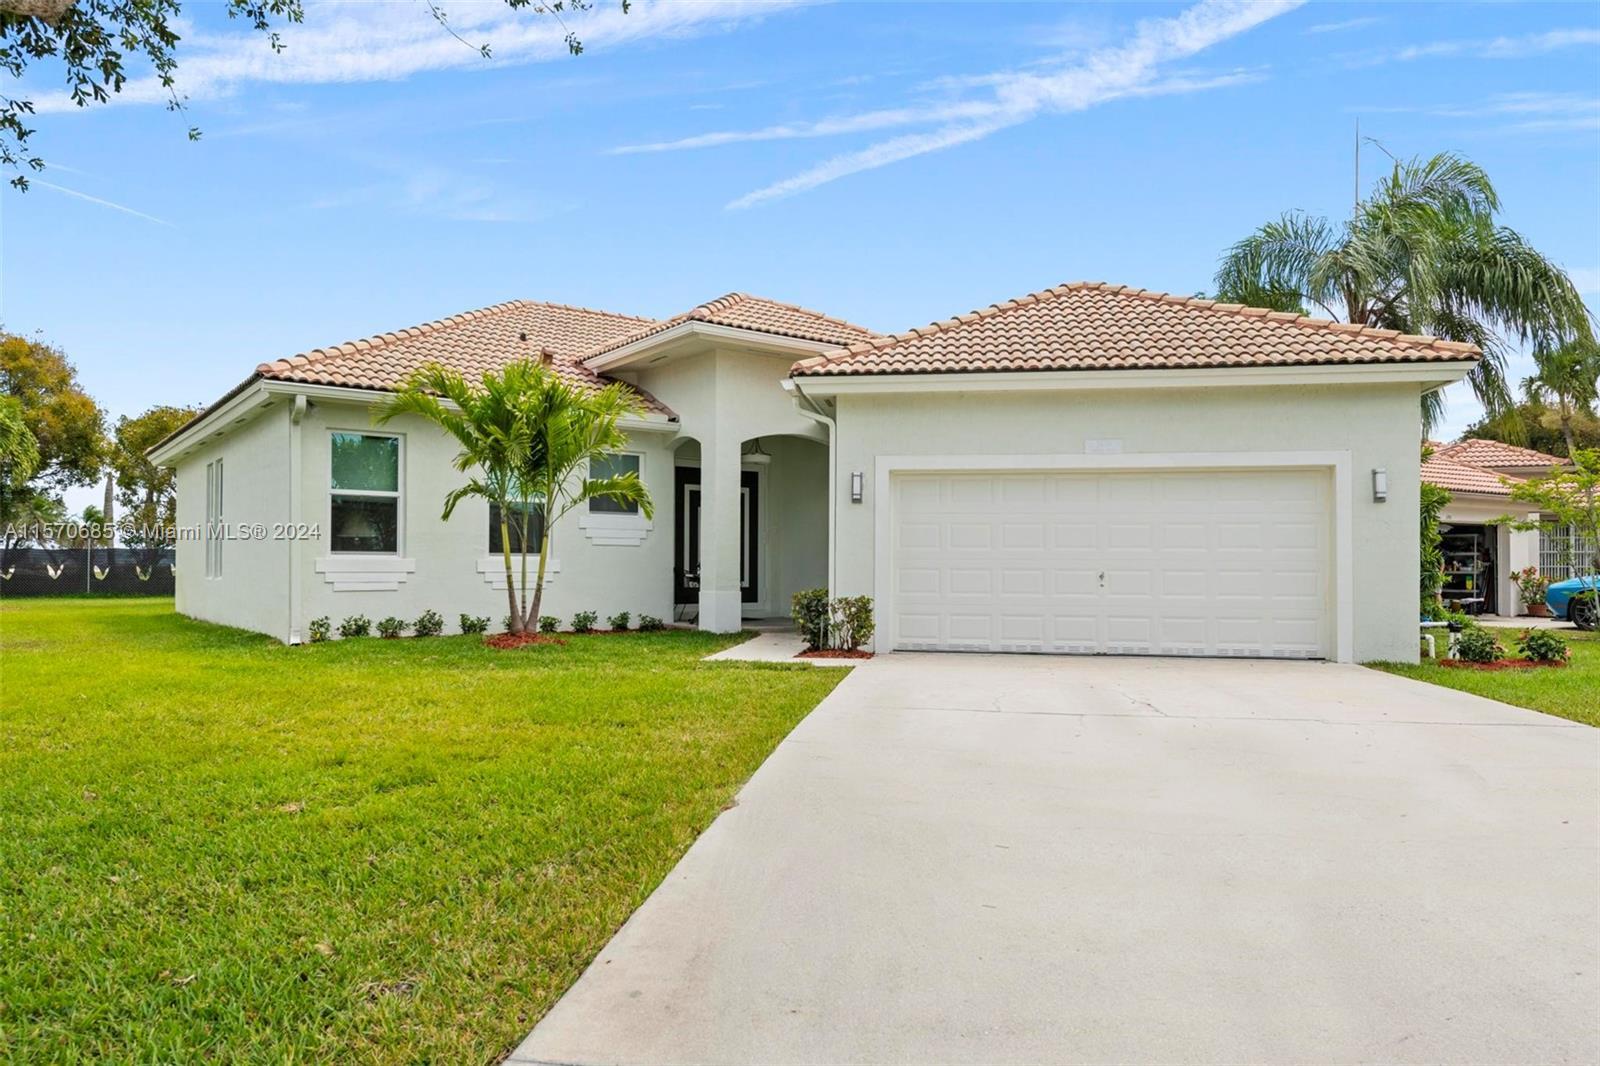 Photo of 2609 Augusta Dr in Homestead, FL